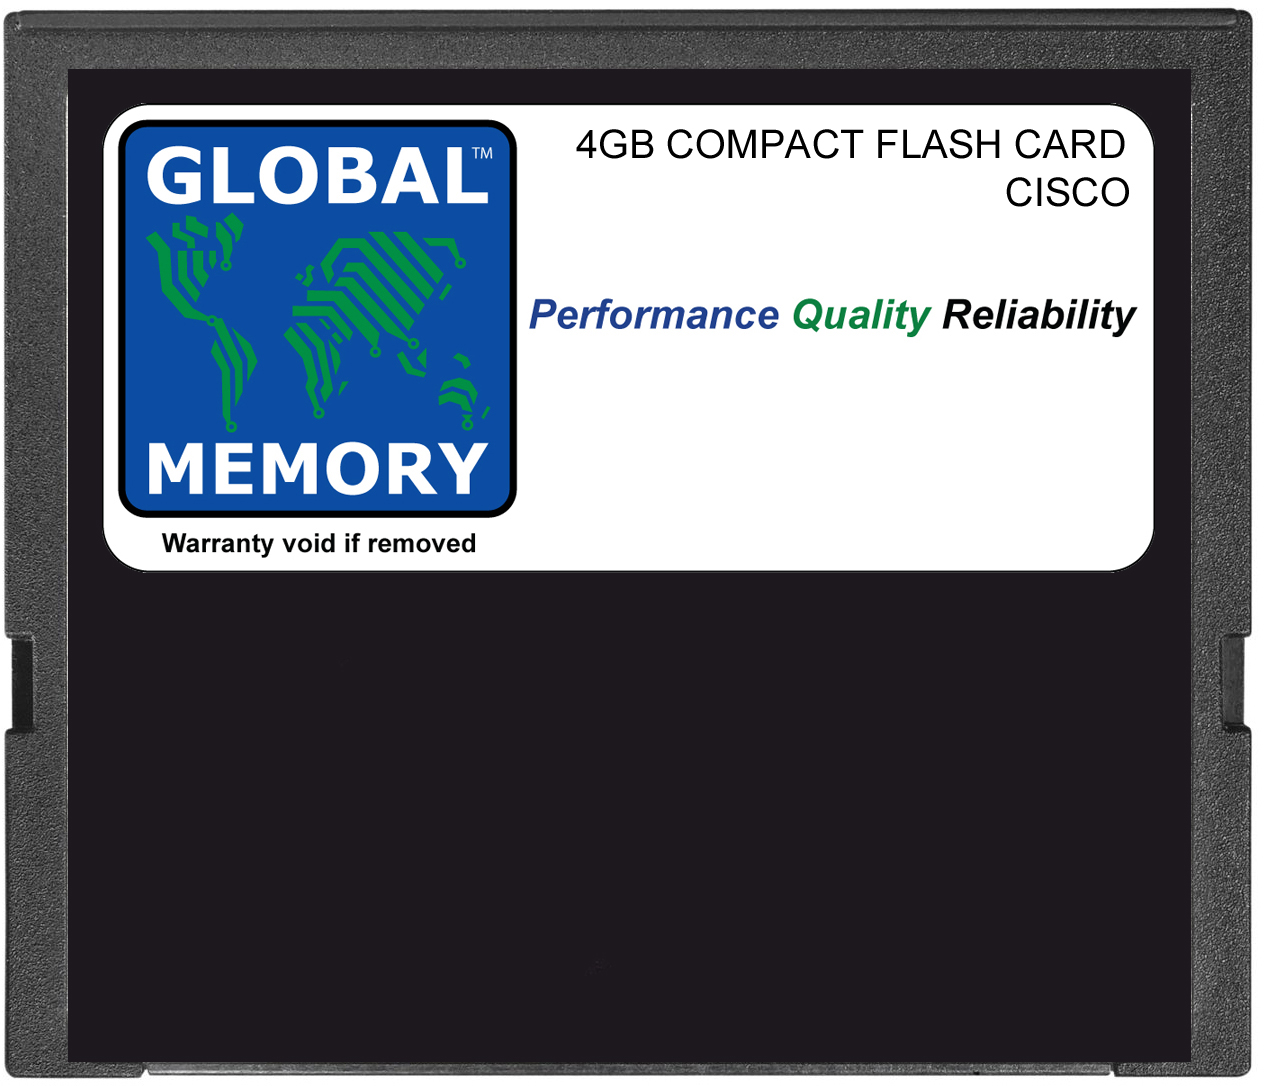 4GB COMPACT FLASH CARD MEMORY FOR CISCO XR12000 SERIES ROUTERS PRP-3 ROUTE PROCESSORS (FLASH-PRP3-4G) - Click Image to Close